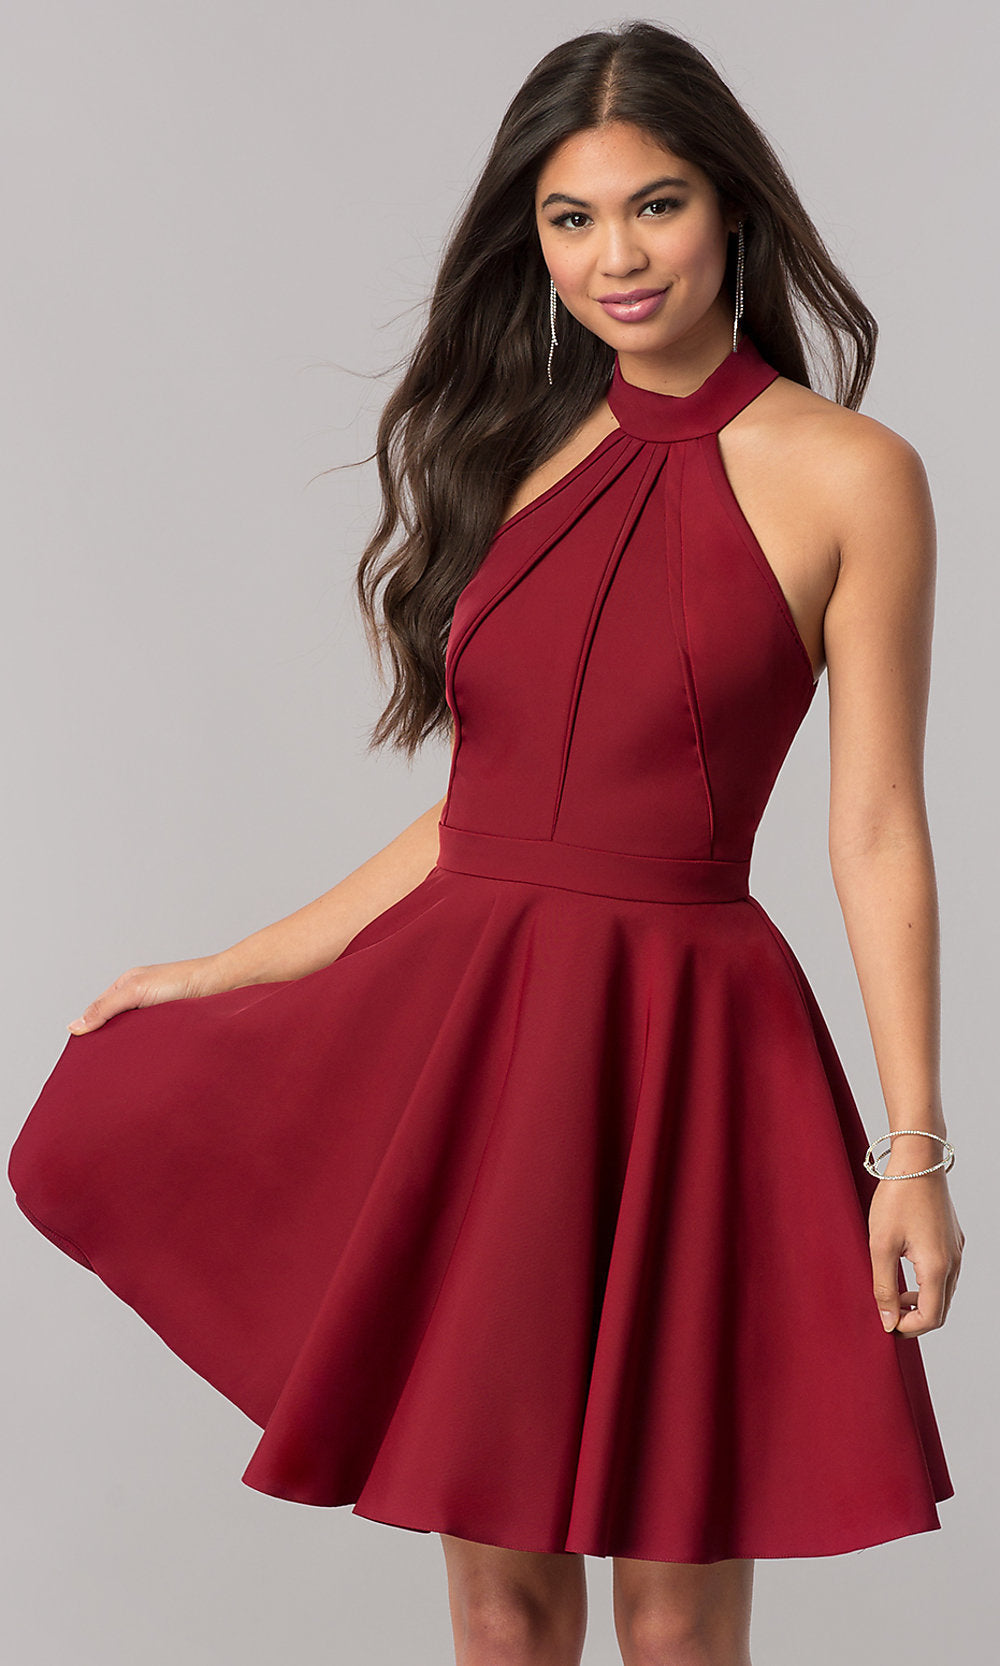 High-Neck Short A-Line Homecoming Dress with Racerback